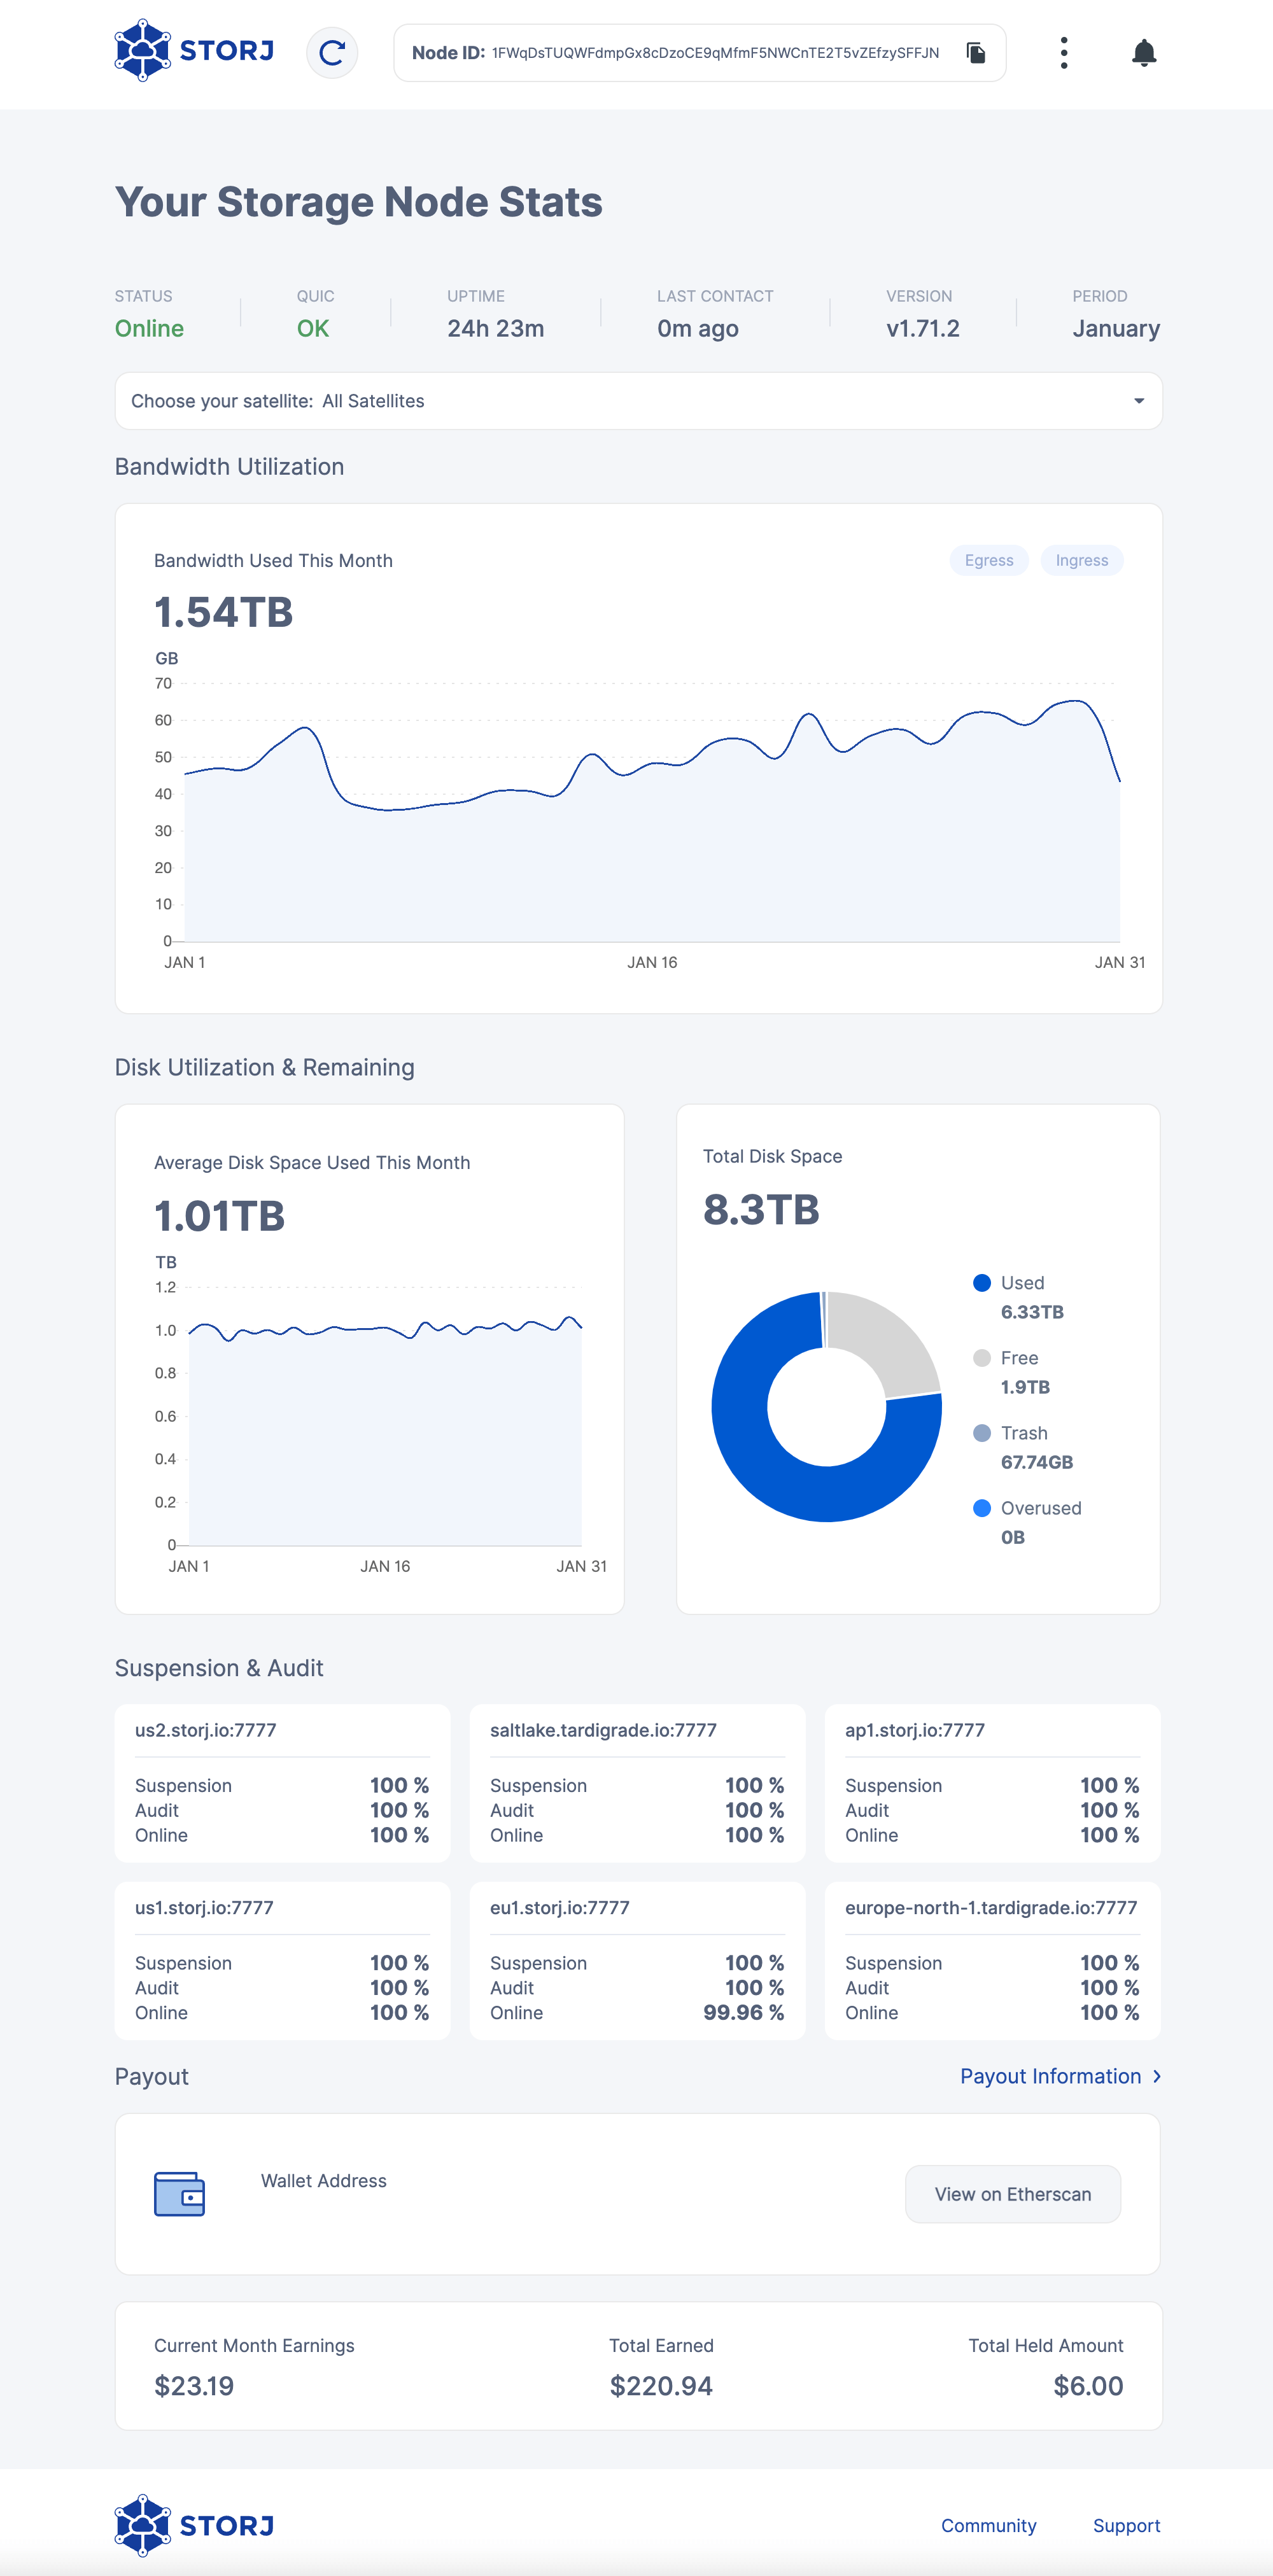 Storj Dashboard end of January 2023. Bandwidth used: 1.54 TB. Average storage space used per day: 1.01 TB. Total available storage: 8.3 TB. Used storage: 6.33 TB. Free disk space: 1.9 TB. Recycle bin: 67.74 GB. Earnings this month: $23.19. Total earnings: $220.94. Withheld earnings: $6.